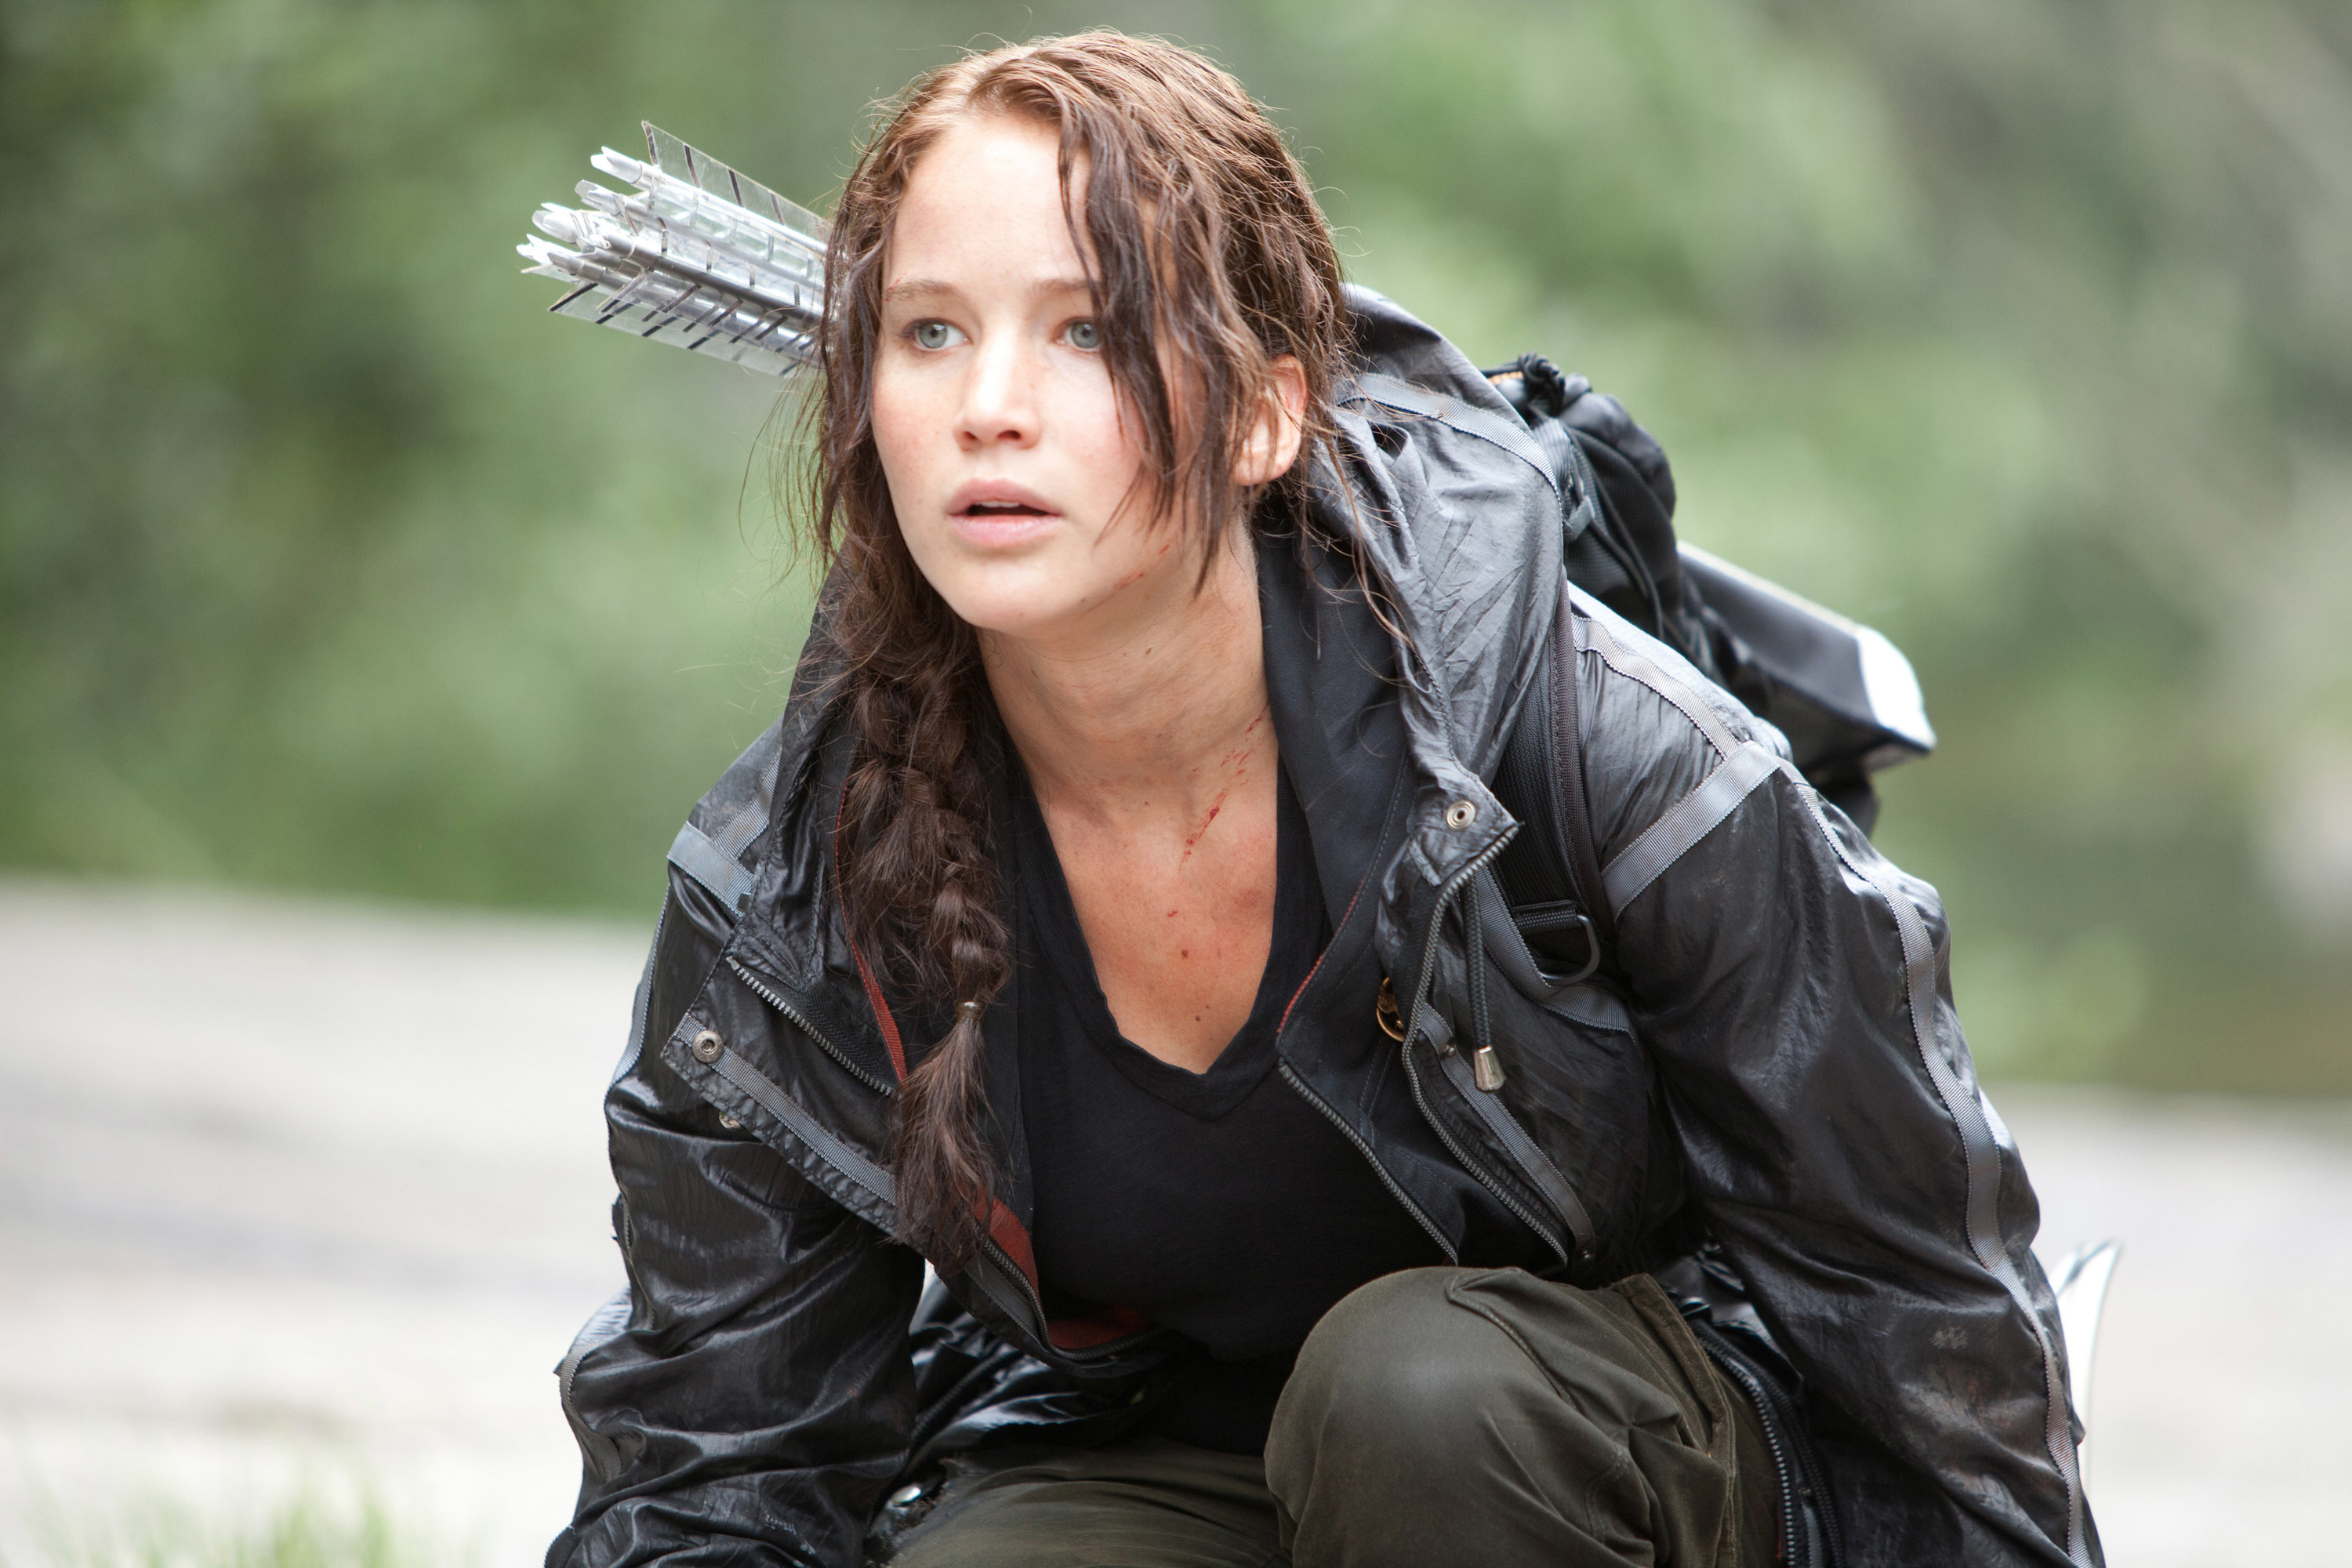 Jennifer Lawrence in the "Hunger Games"